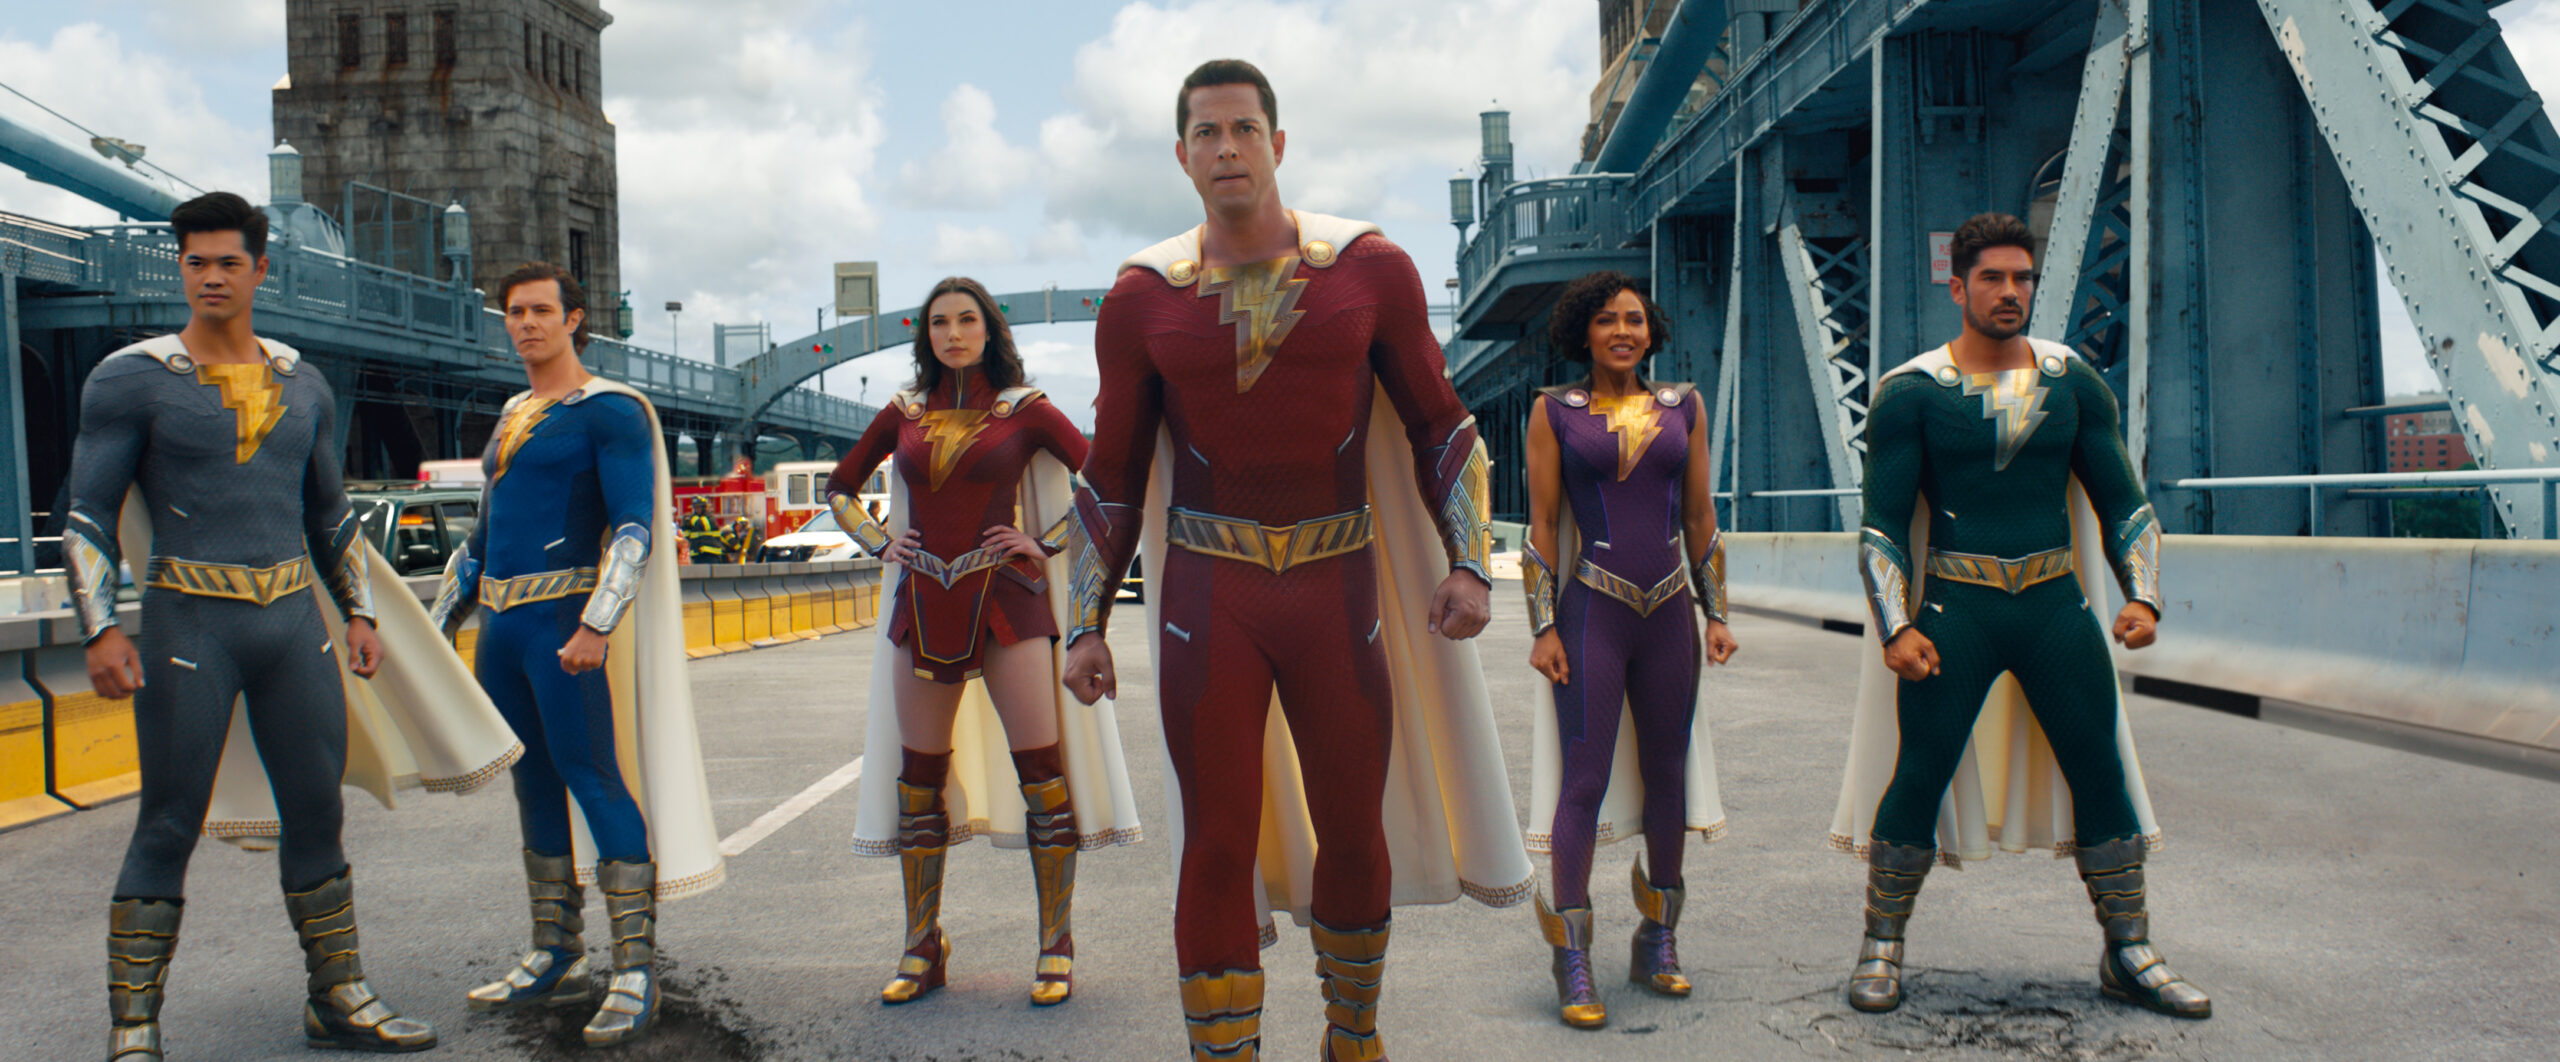 It’s All About Family In Shazam! Fury Of The Gods Trailer | SDCC